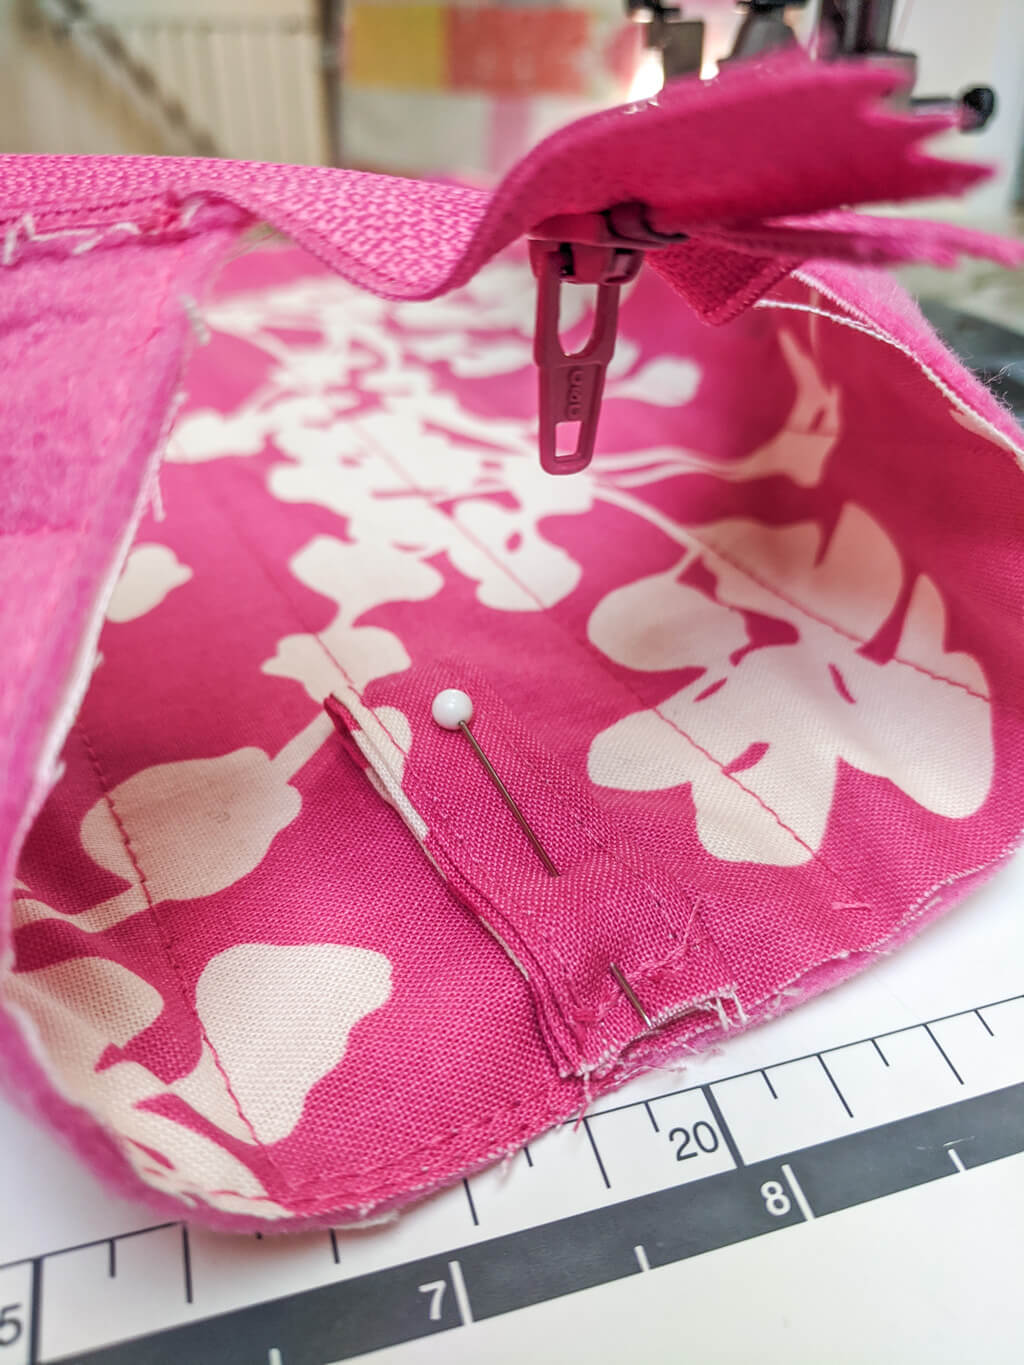 How to add a tab to a zipper pencil case pouch